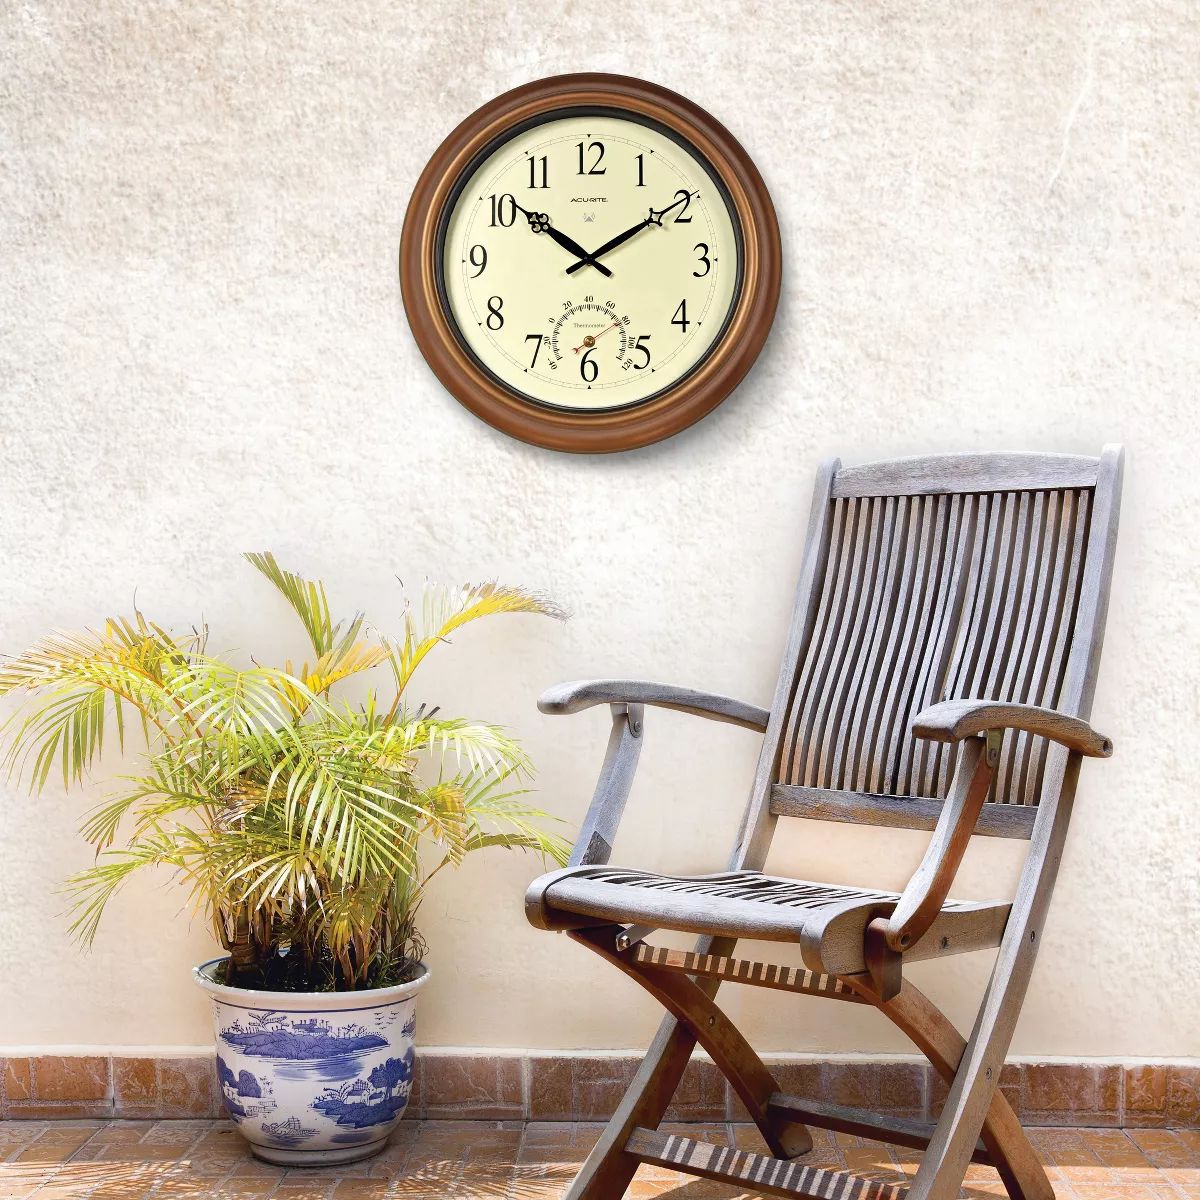 18" Metal Outdoor/Indoor Atomic Wall Clock with Thermometer - Copper Finish - AcuRite | Target